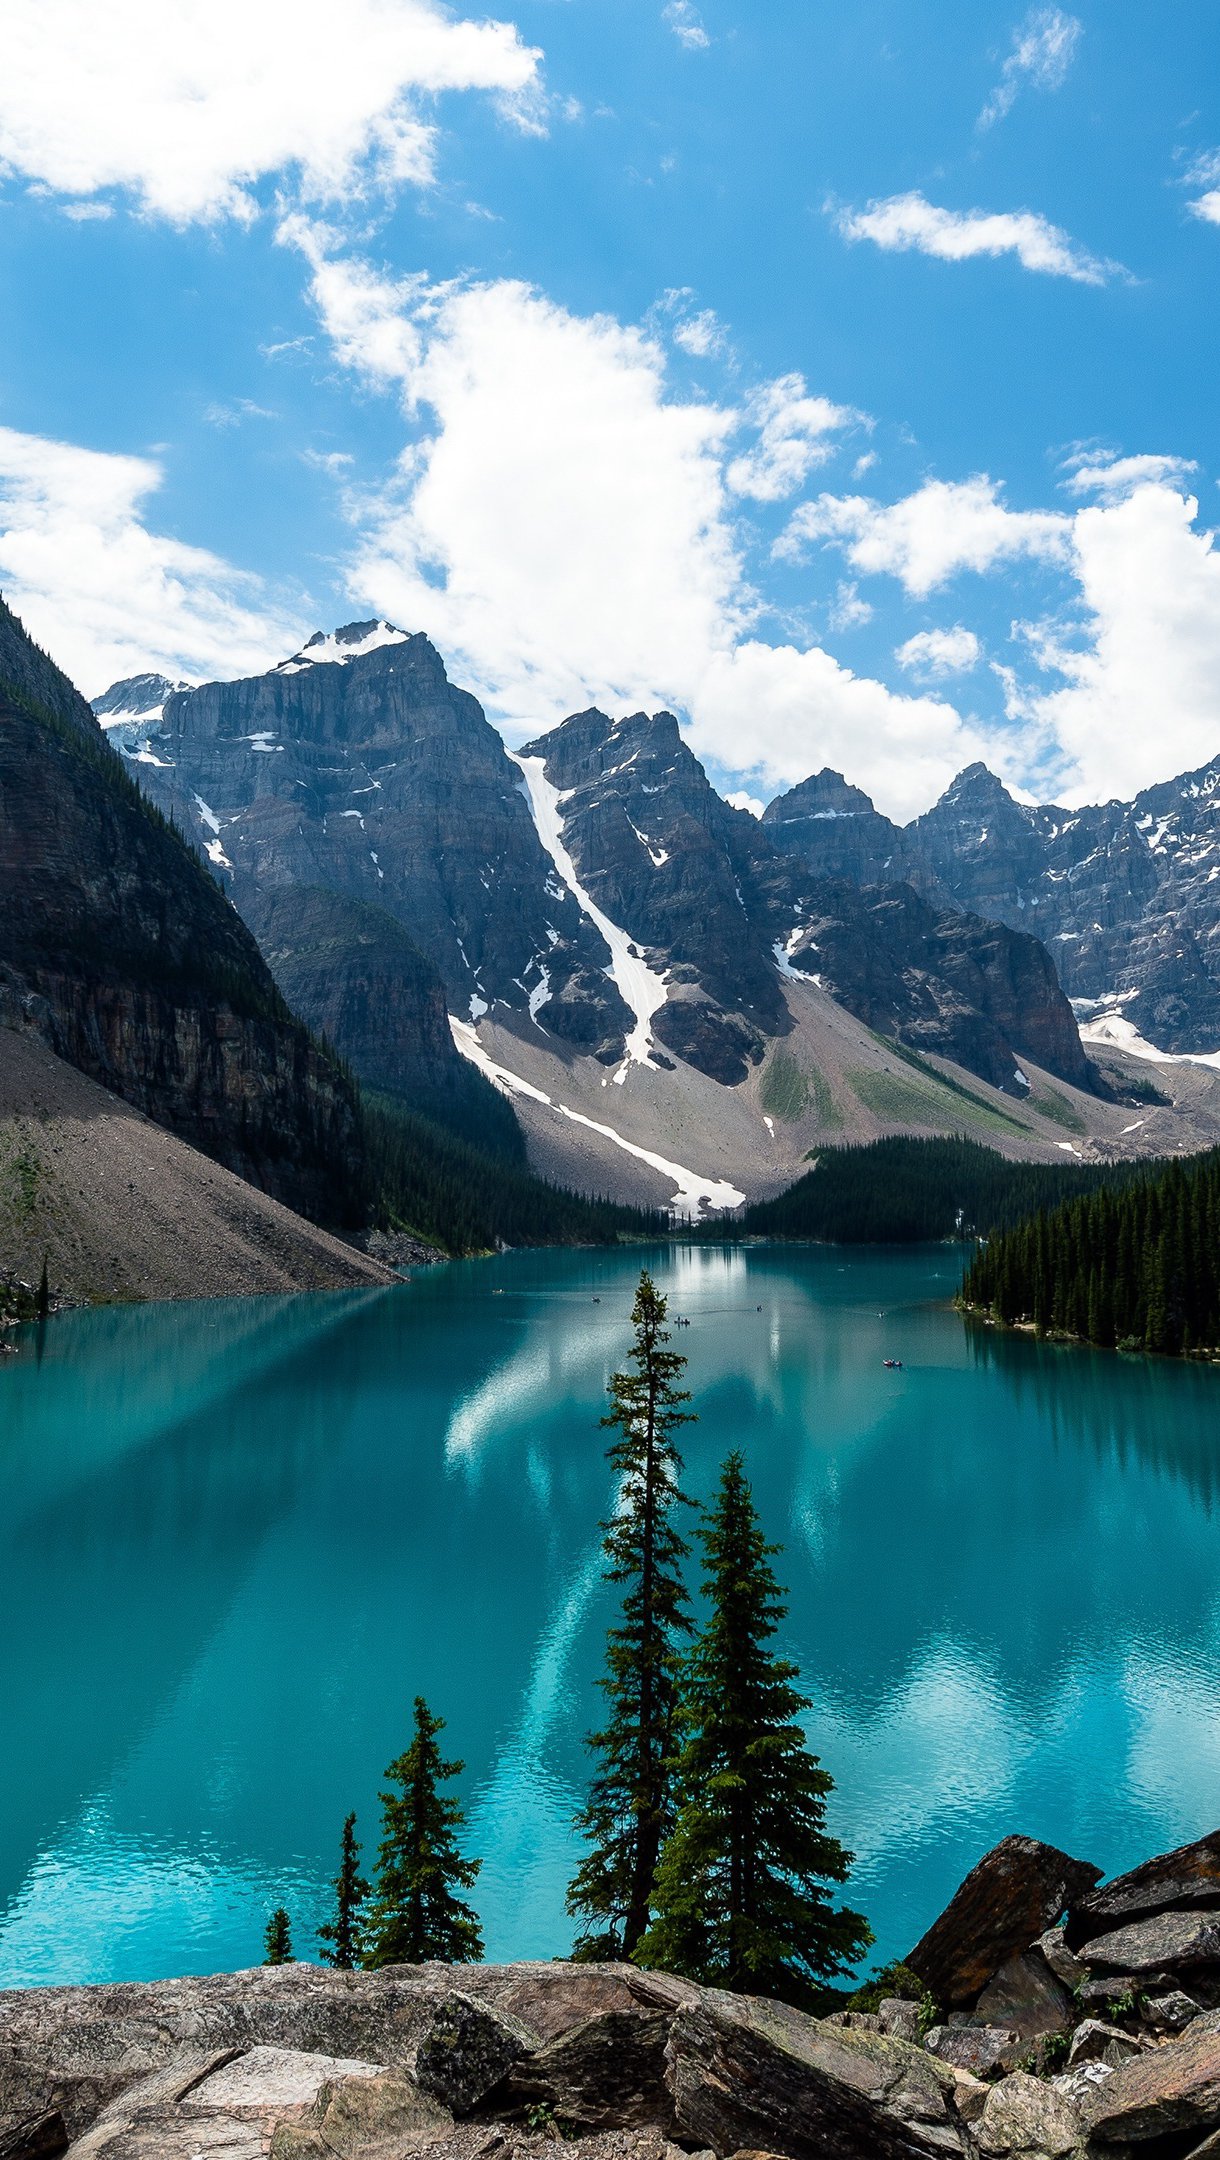 Mountains on lake at forest Wallpaper 4k Ultra HD ID:5763